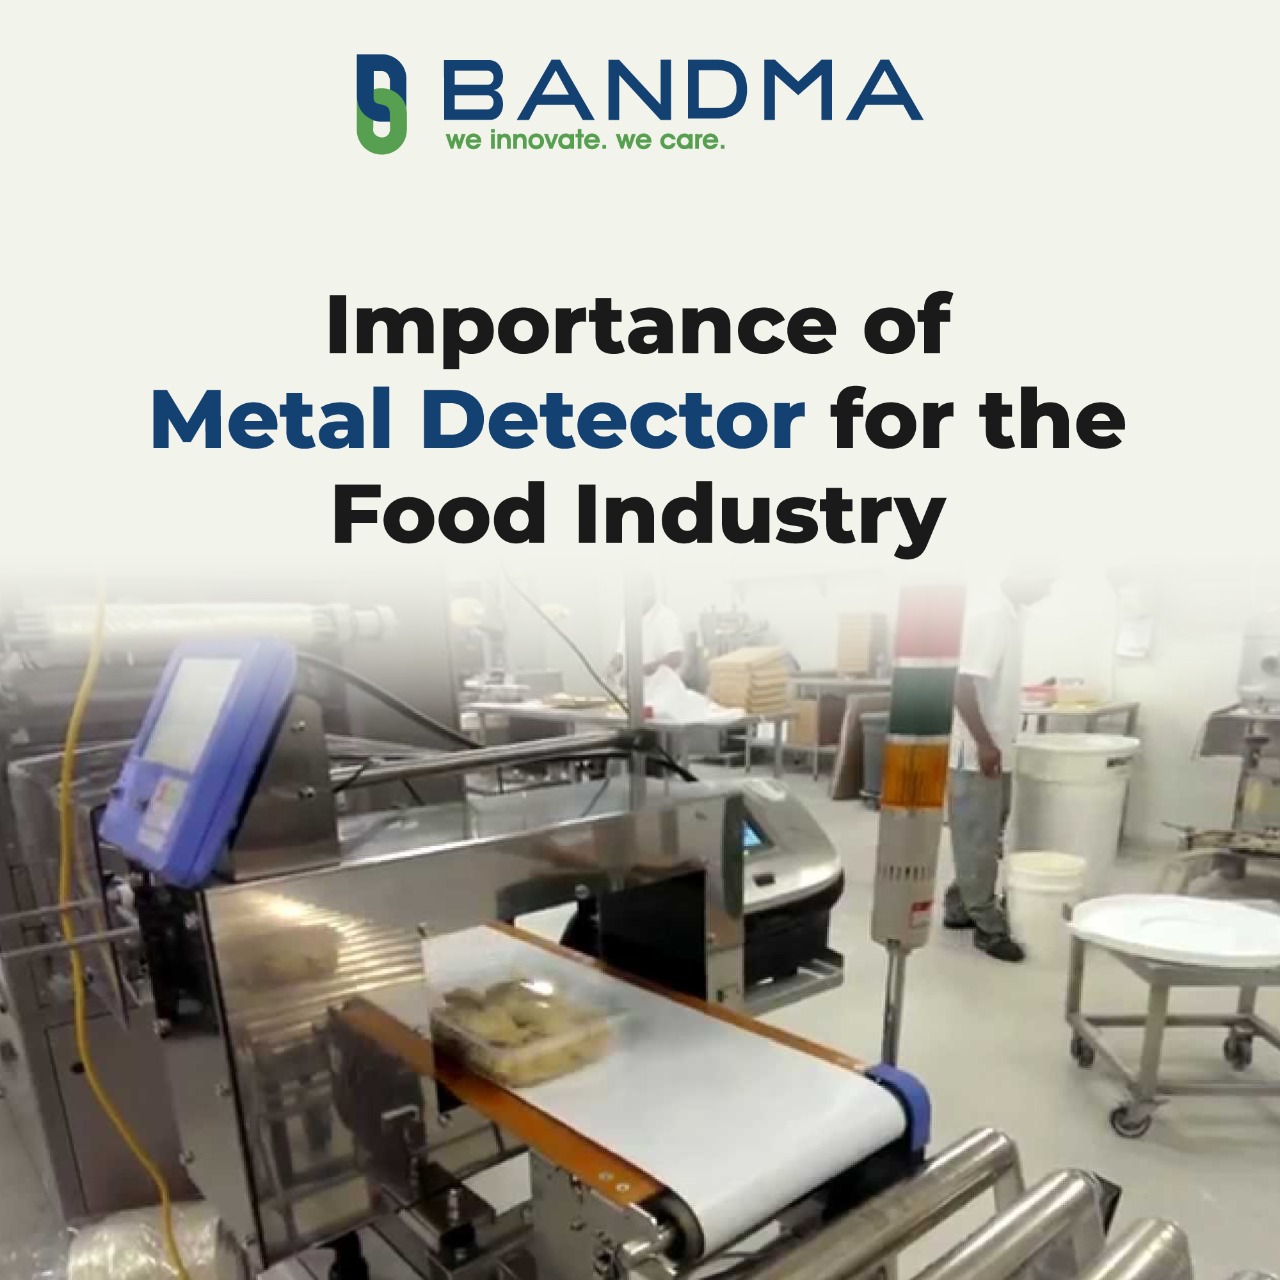 Importance of Metal Detector for Food Industry